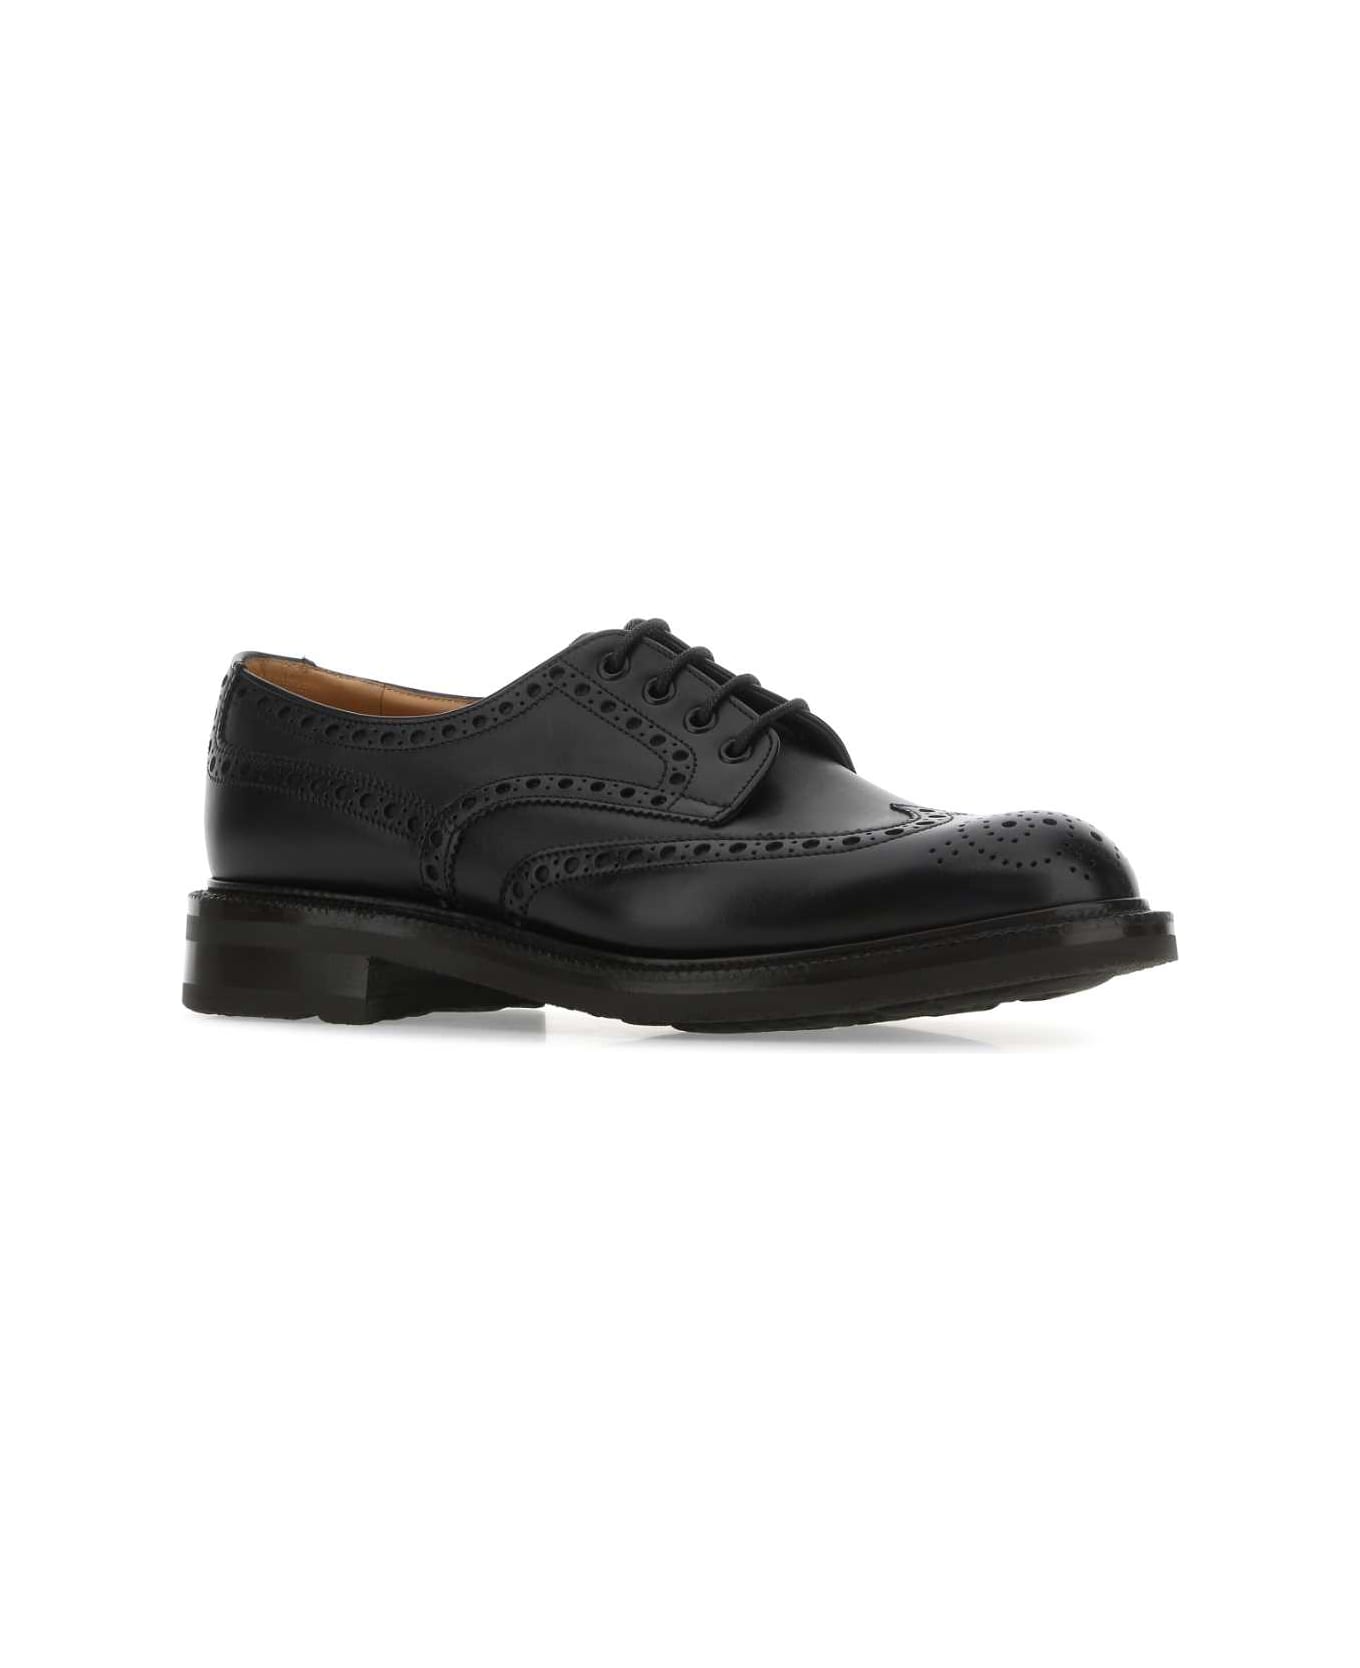 Church's Black Leather Horsham Lace-up Shoes - F0AAB